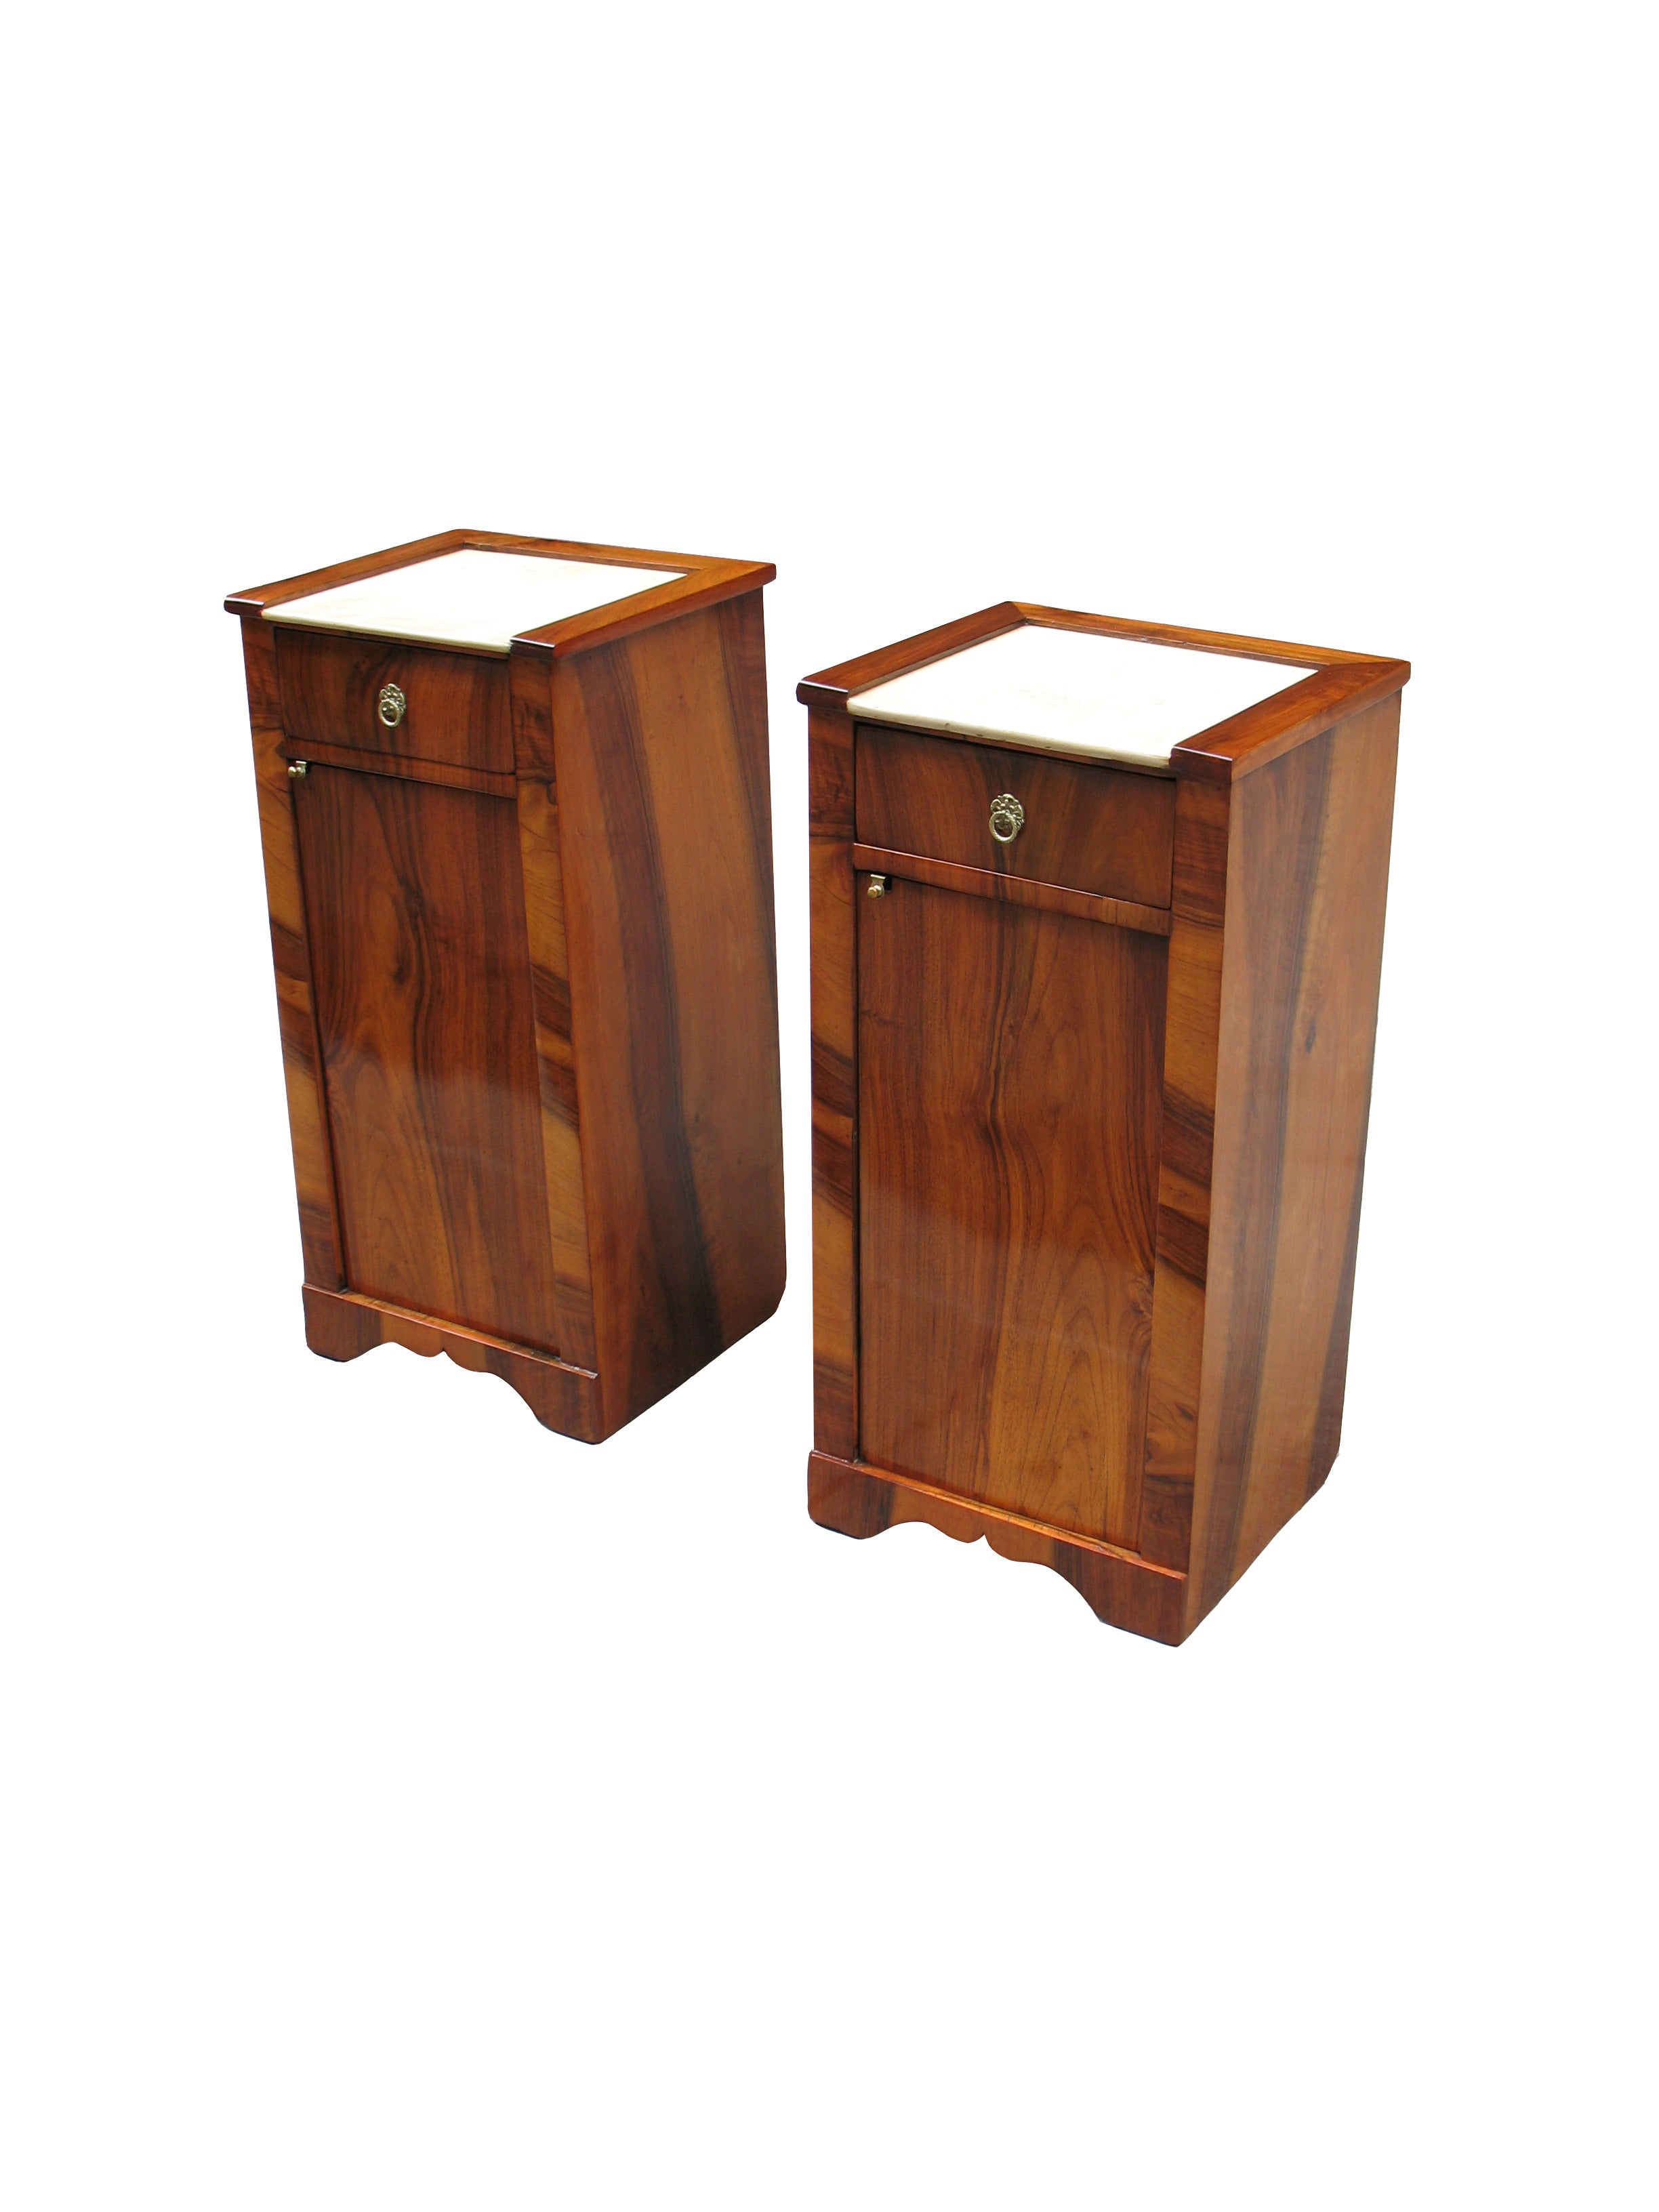 A Rare Pair of Biedermeier Side Stands/Commodes